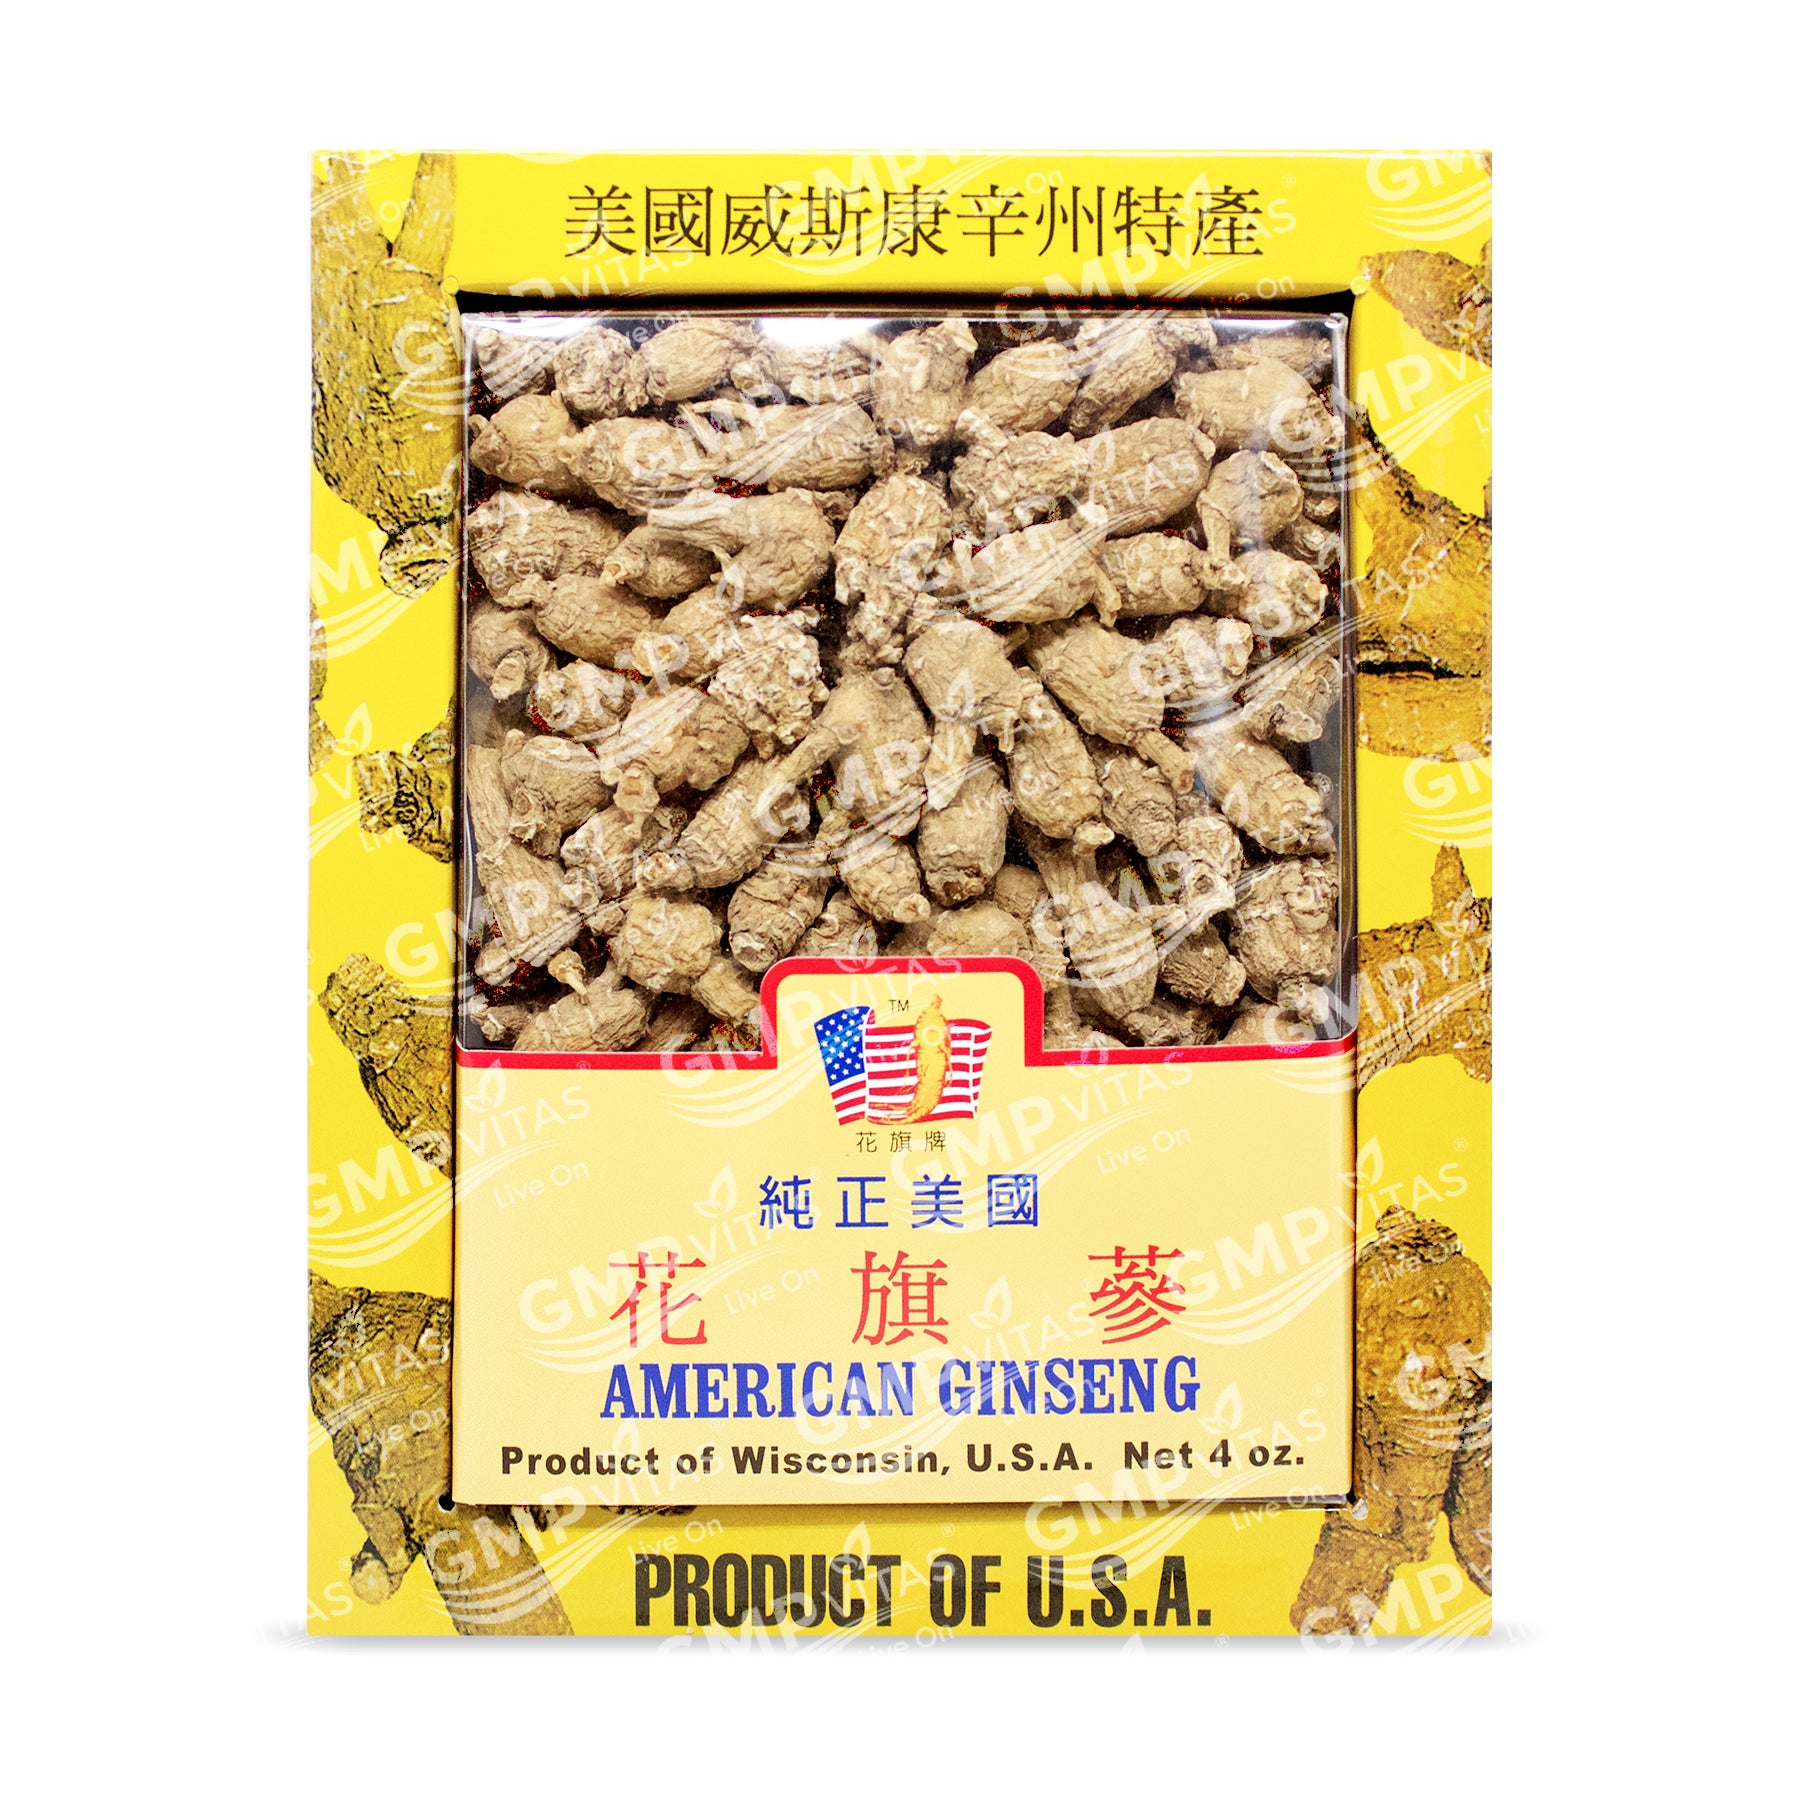 Wisconsin Ginseng  - Aged more than 5 years, Small  4oz